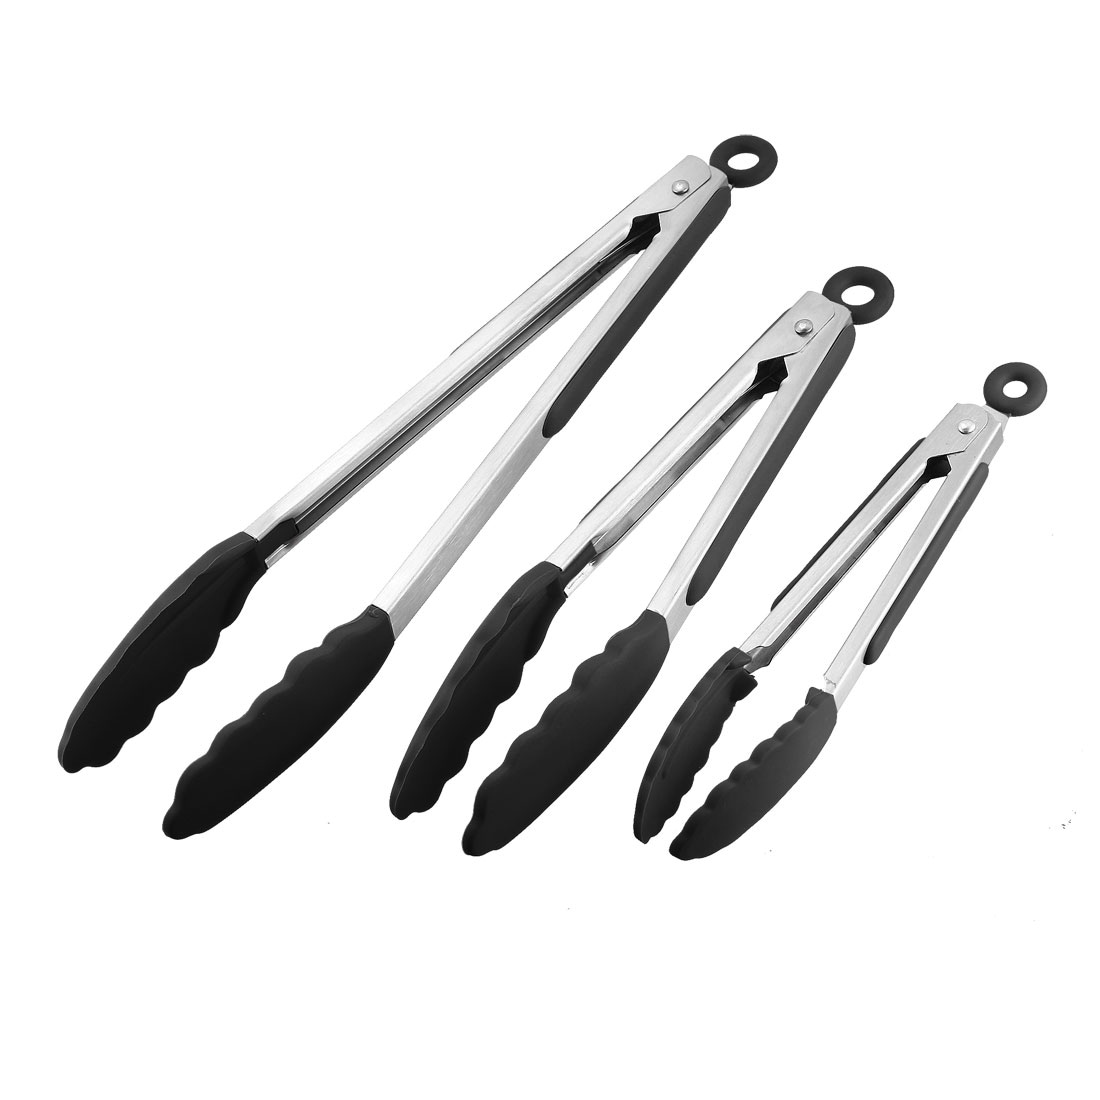 KitchenAid Silicone Tipped Stainless Steel Tongs, Black